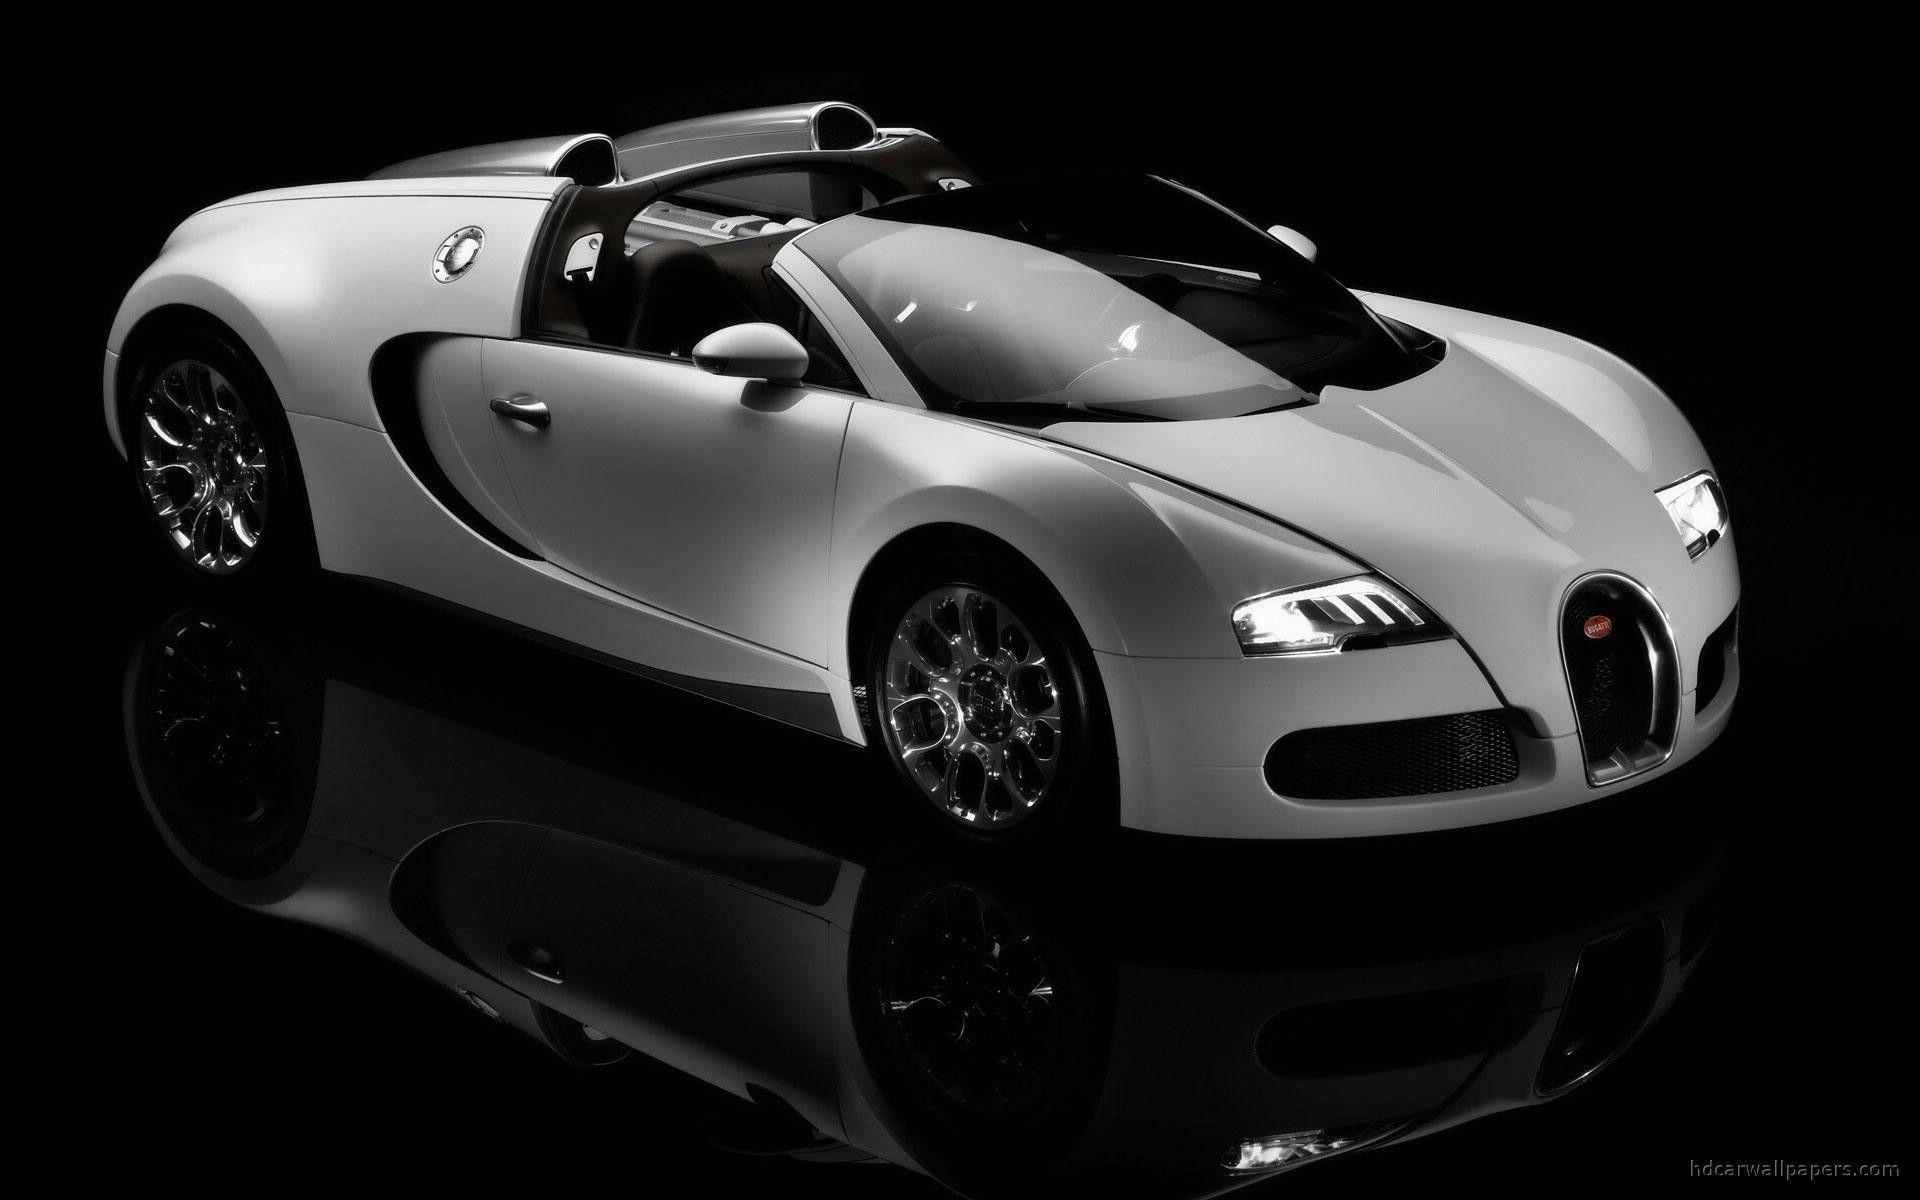 The Luxury And Power Of A White Gold Bugatti Veyron Grand Sport